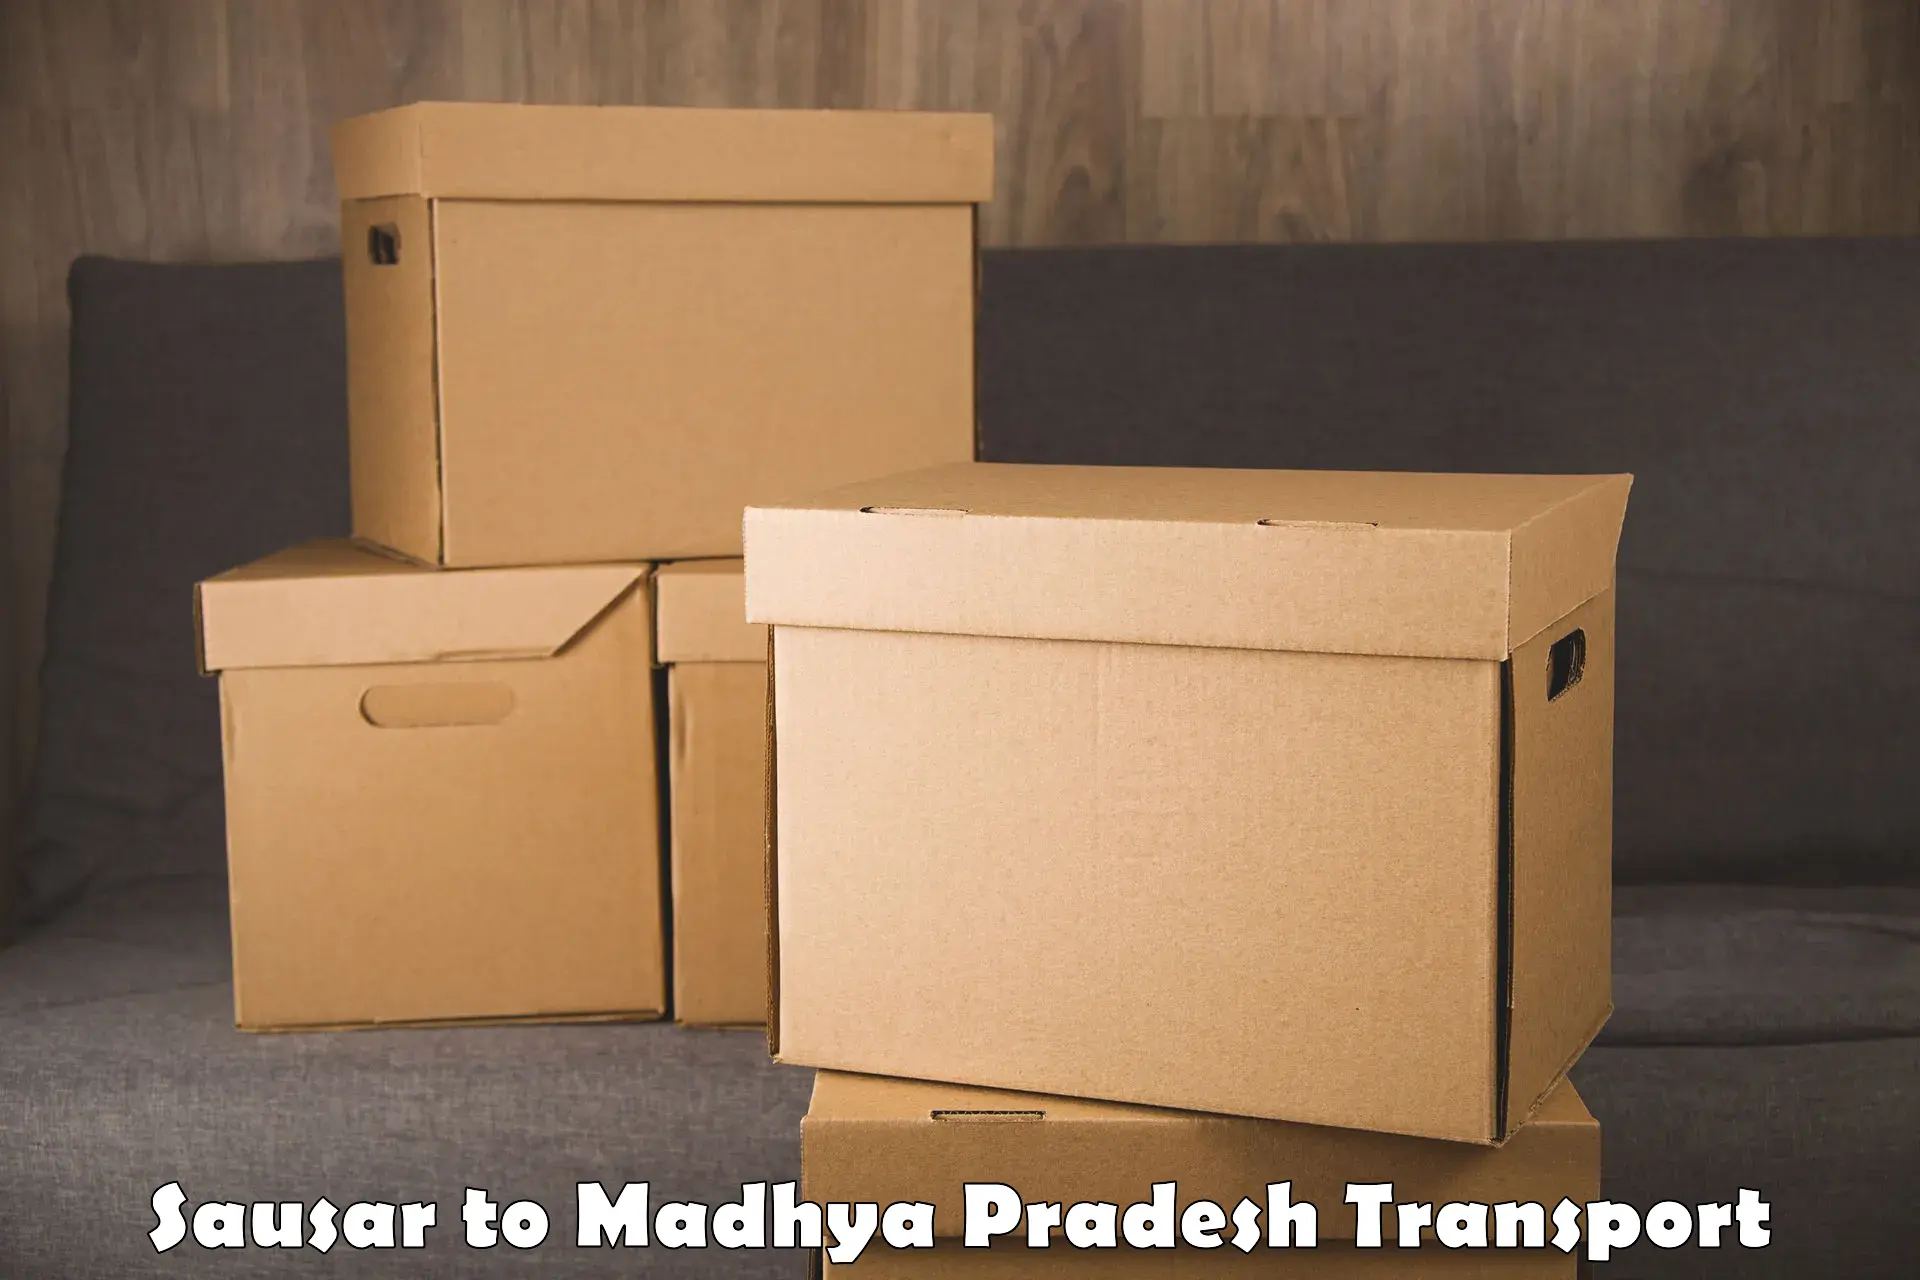 Truck transport companies in India Sausar to Chand Chaurai